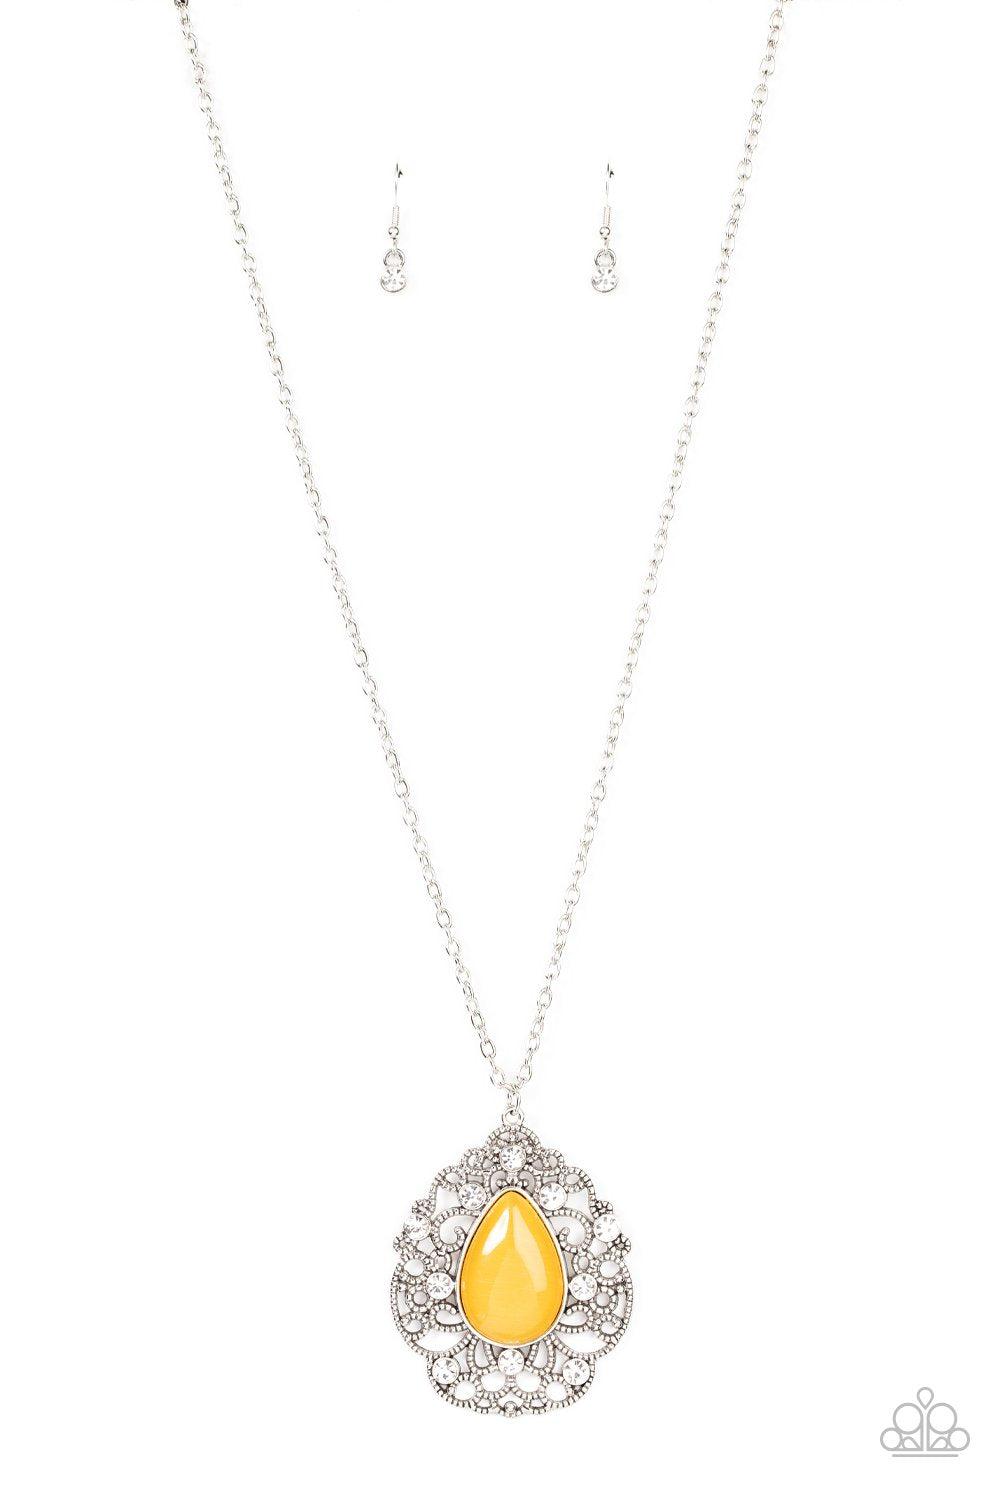 Bewitched Beam Yellow Cat's Eye Stone Necklace - Paparazzi Accessories- lightbox - CarasShop.com - $5 Jewelry by Cara Jewels